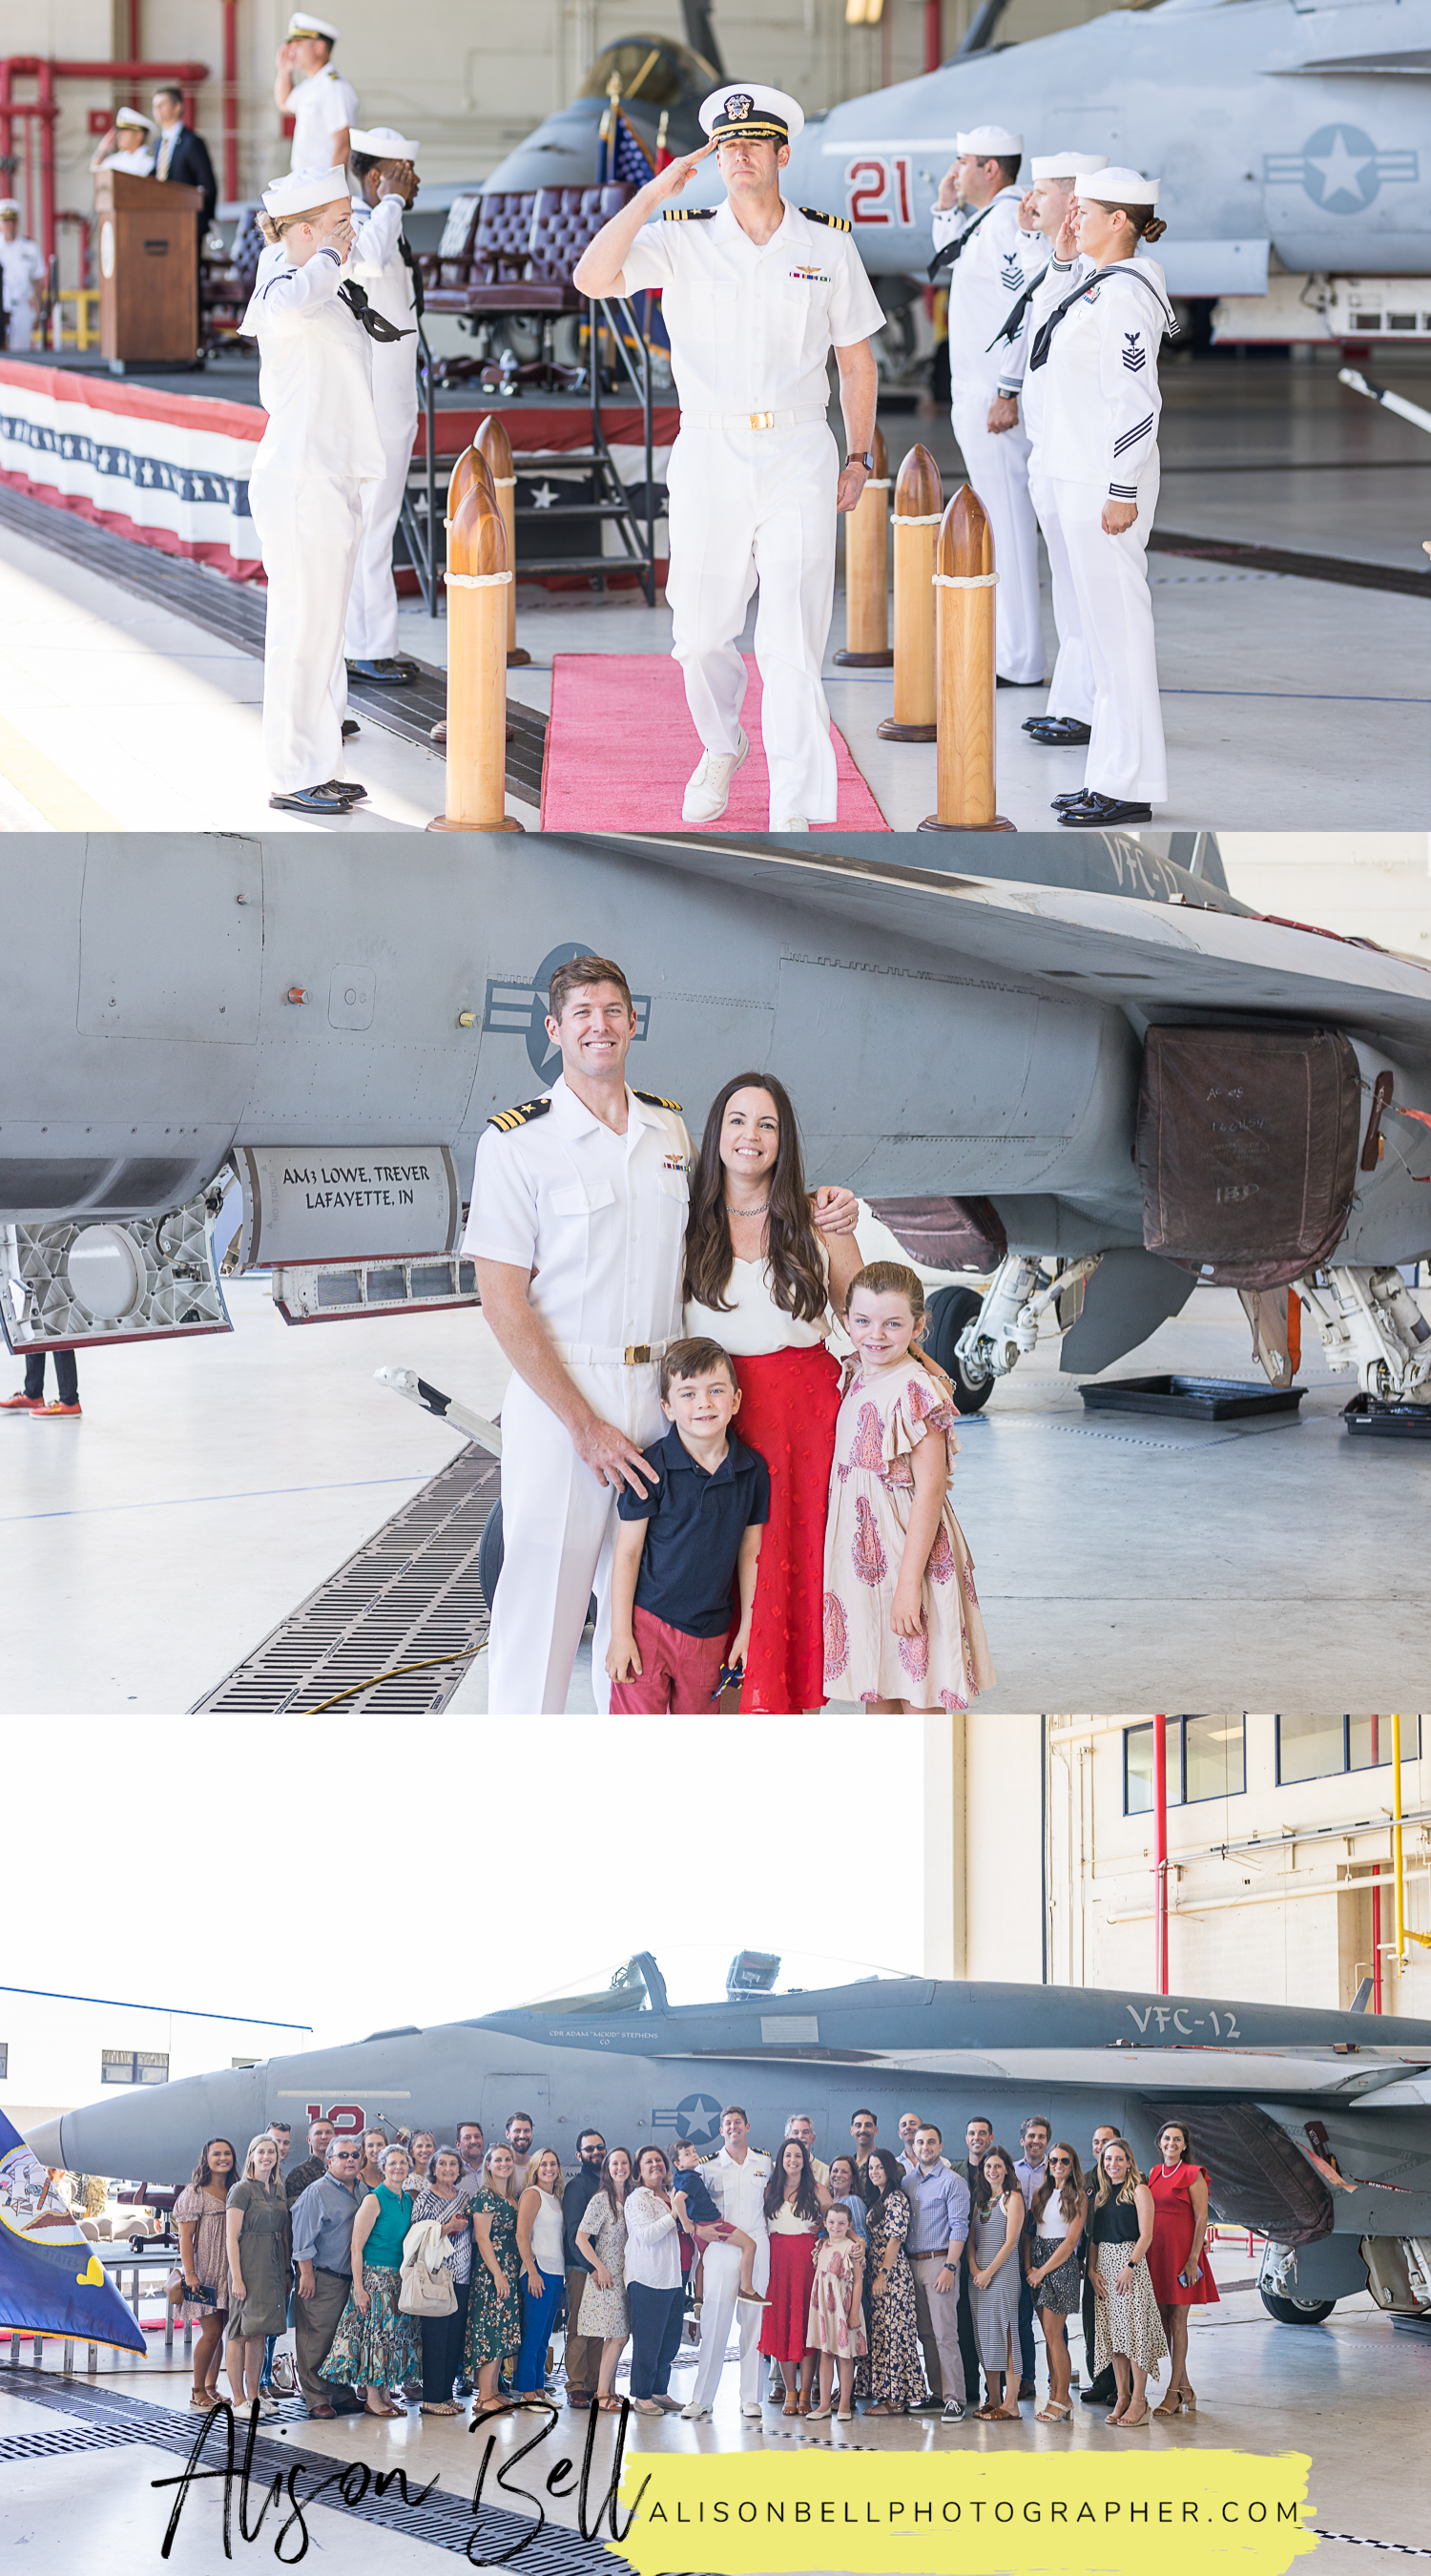 Navy change of command ceremony in a hangar at Naval Air Station Oceana in Virginia Beach, VA